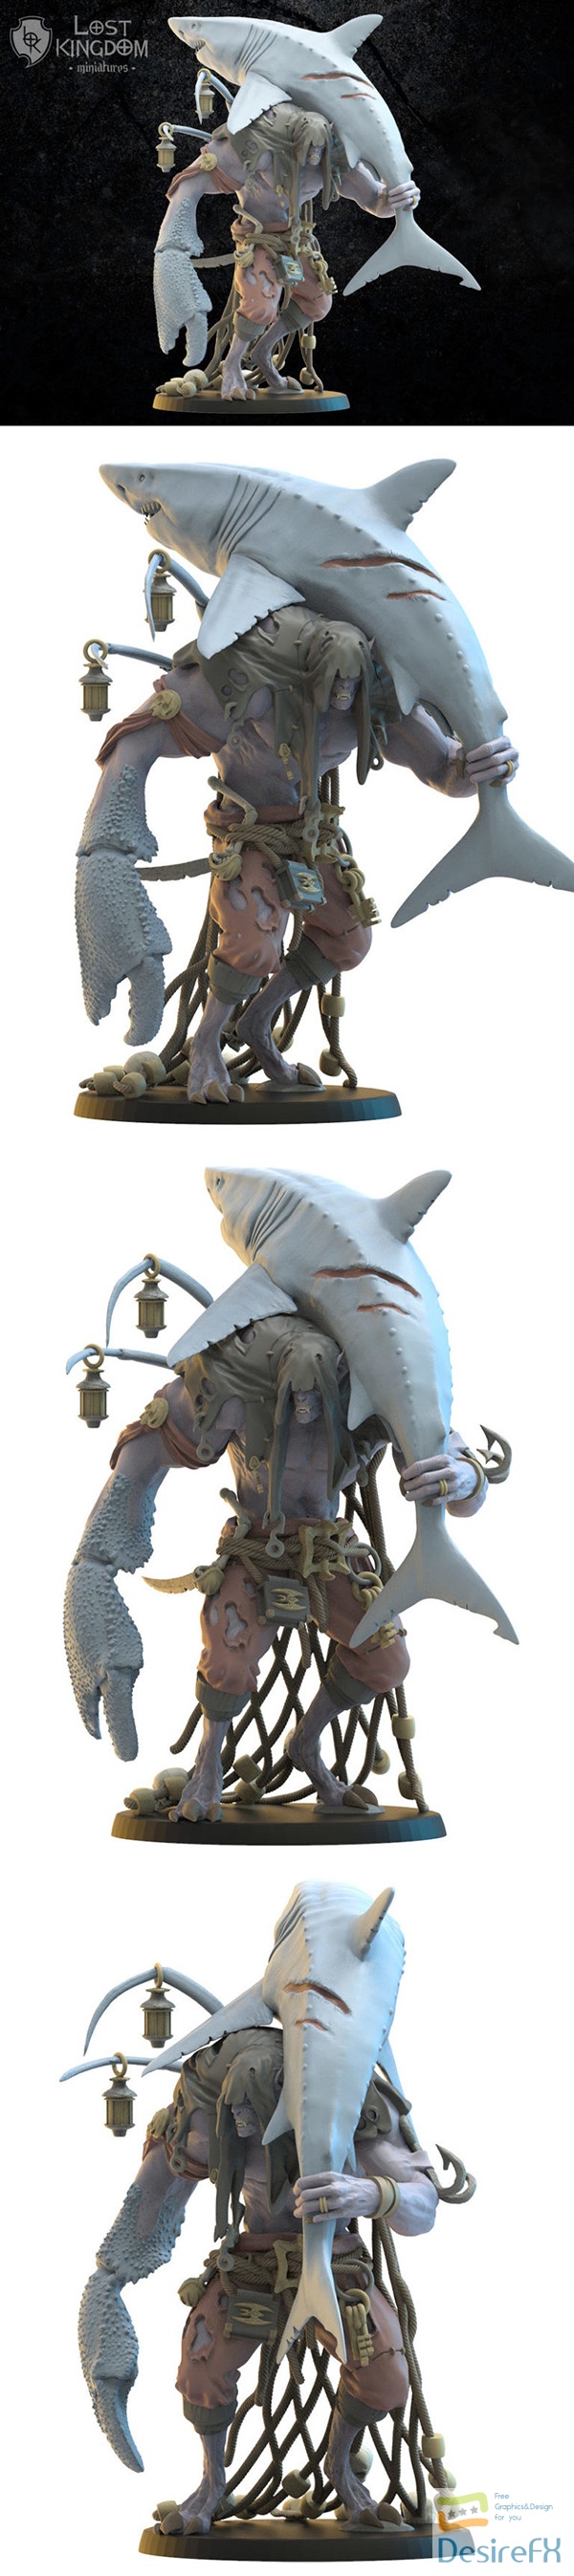 Eldritch The Claw Vycanthrope Hero – 3D Print